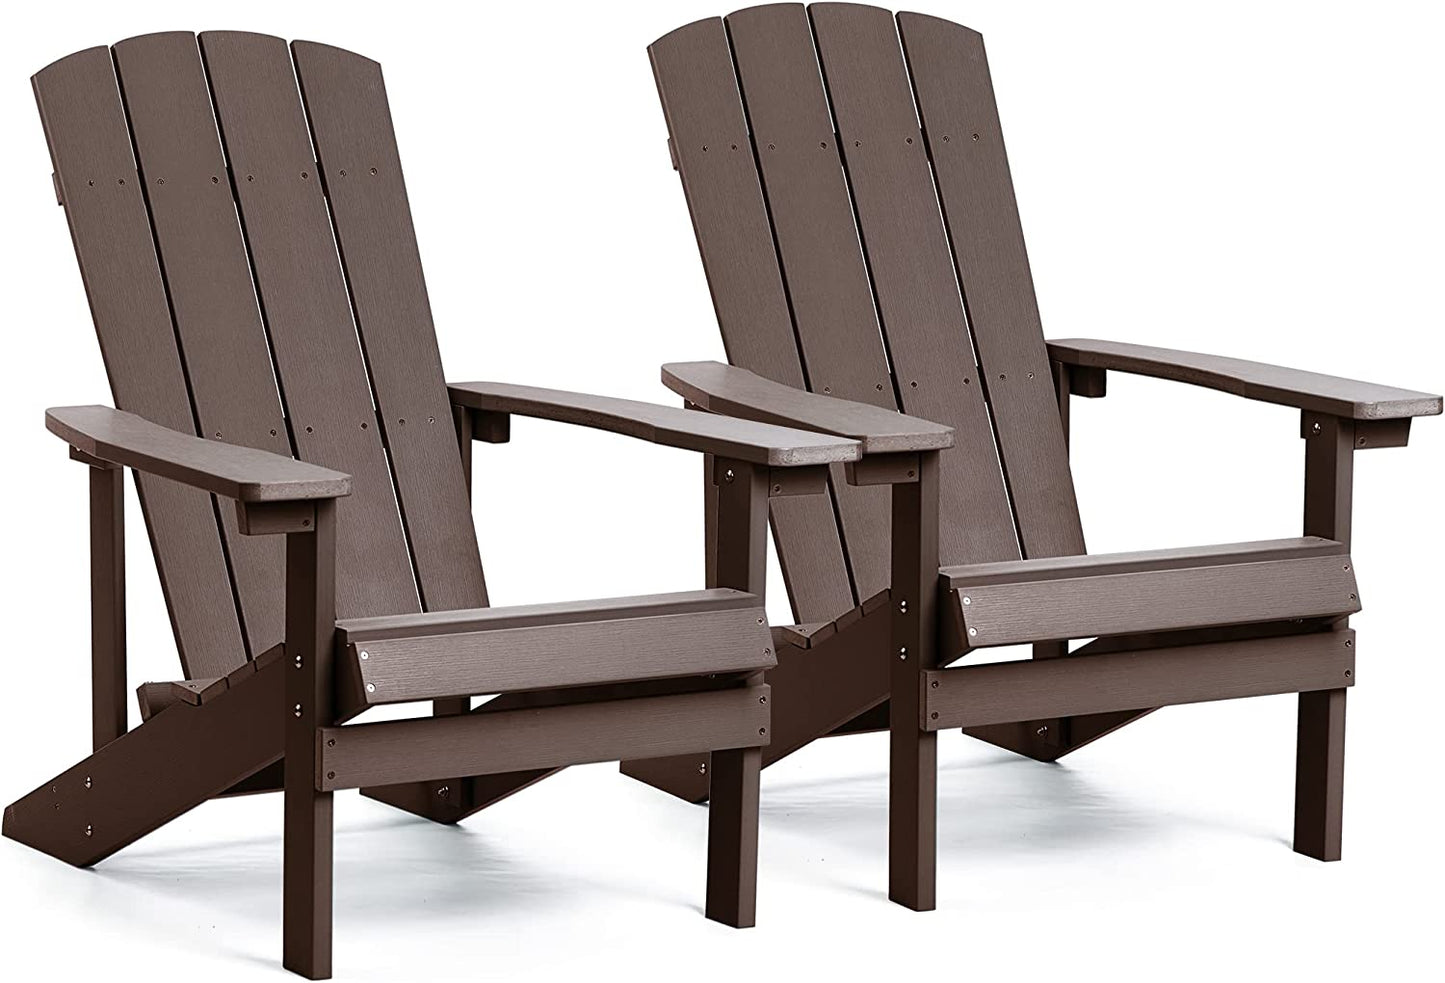 Plastic Adirondack Chairs Set of 2, Weather Resistant Patio Chairs, Outdoor Deck Fire Pit Chairs